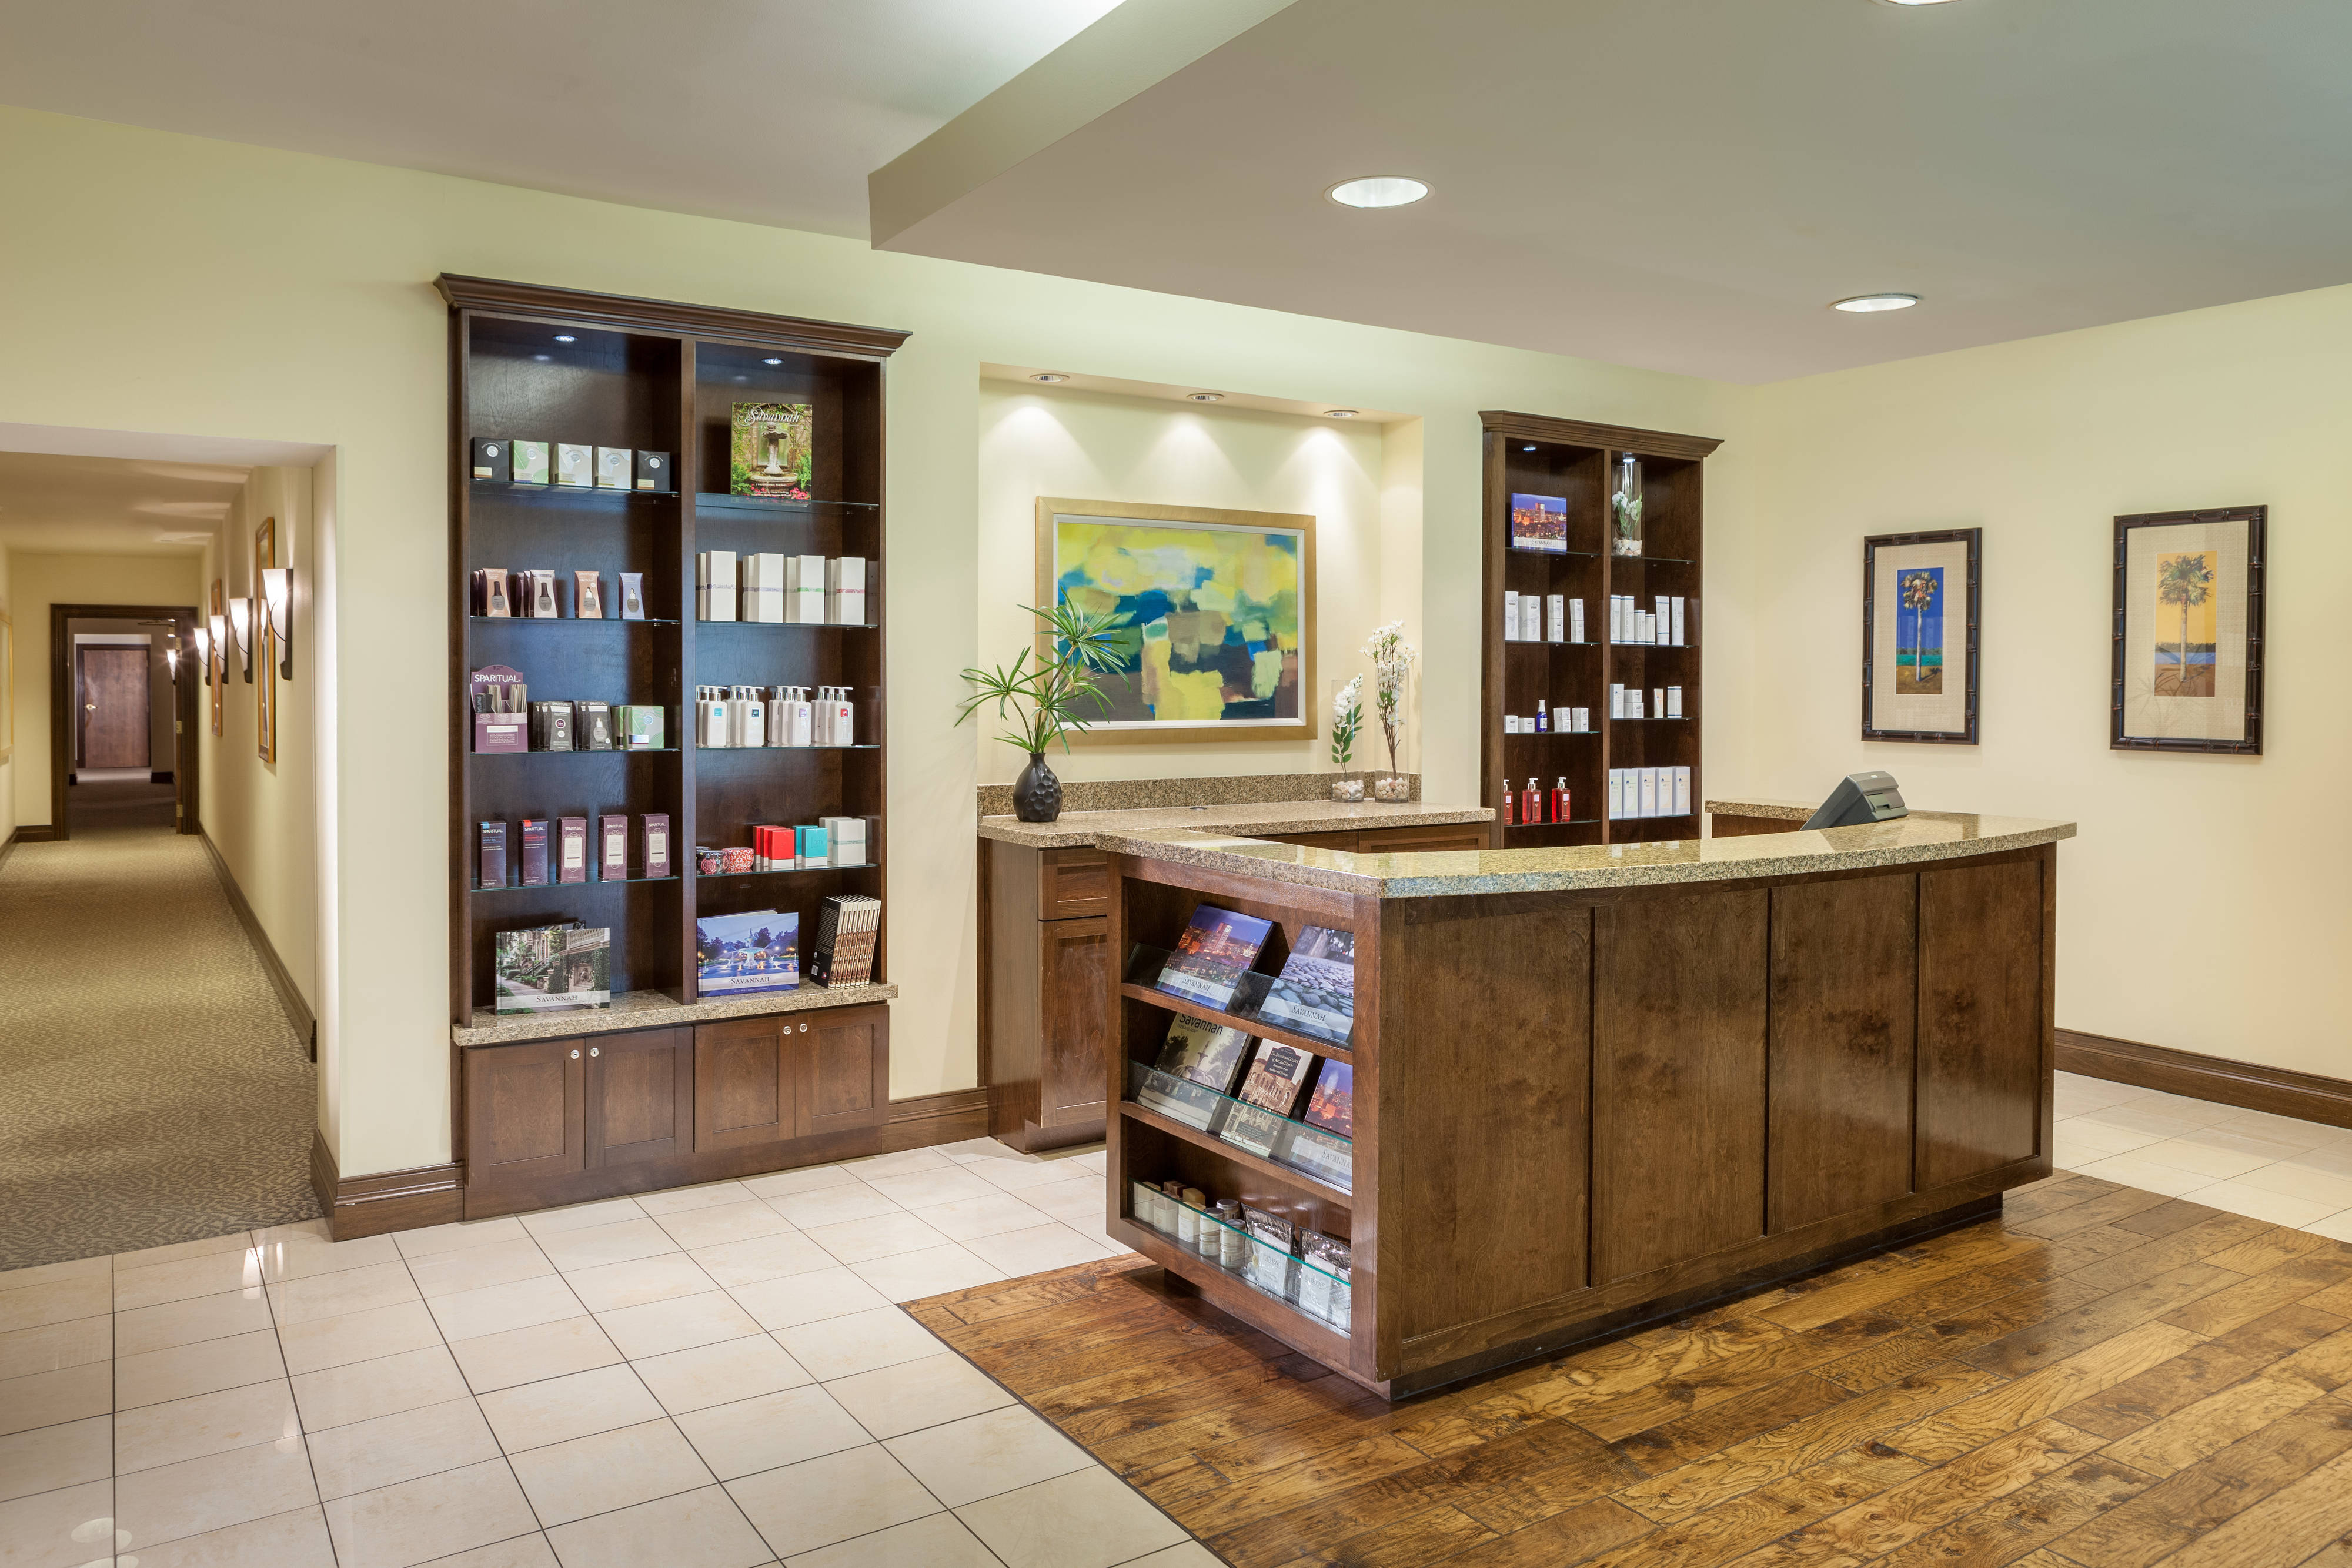 Magnolia Spa front desk with product displays on shelves and art on walls